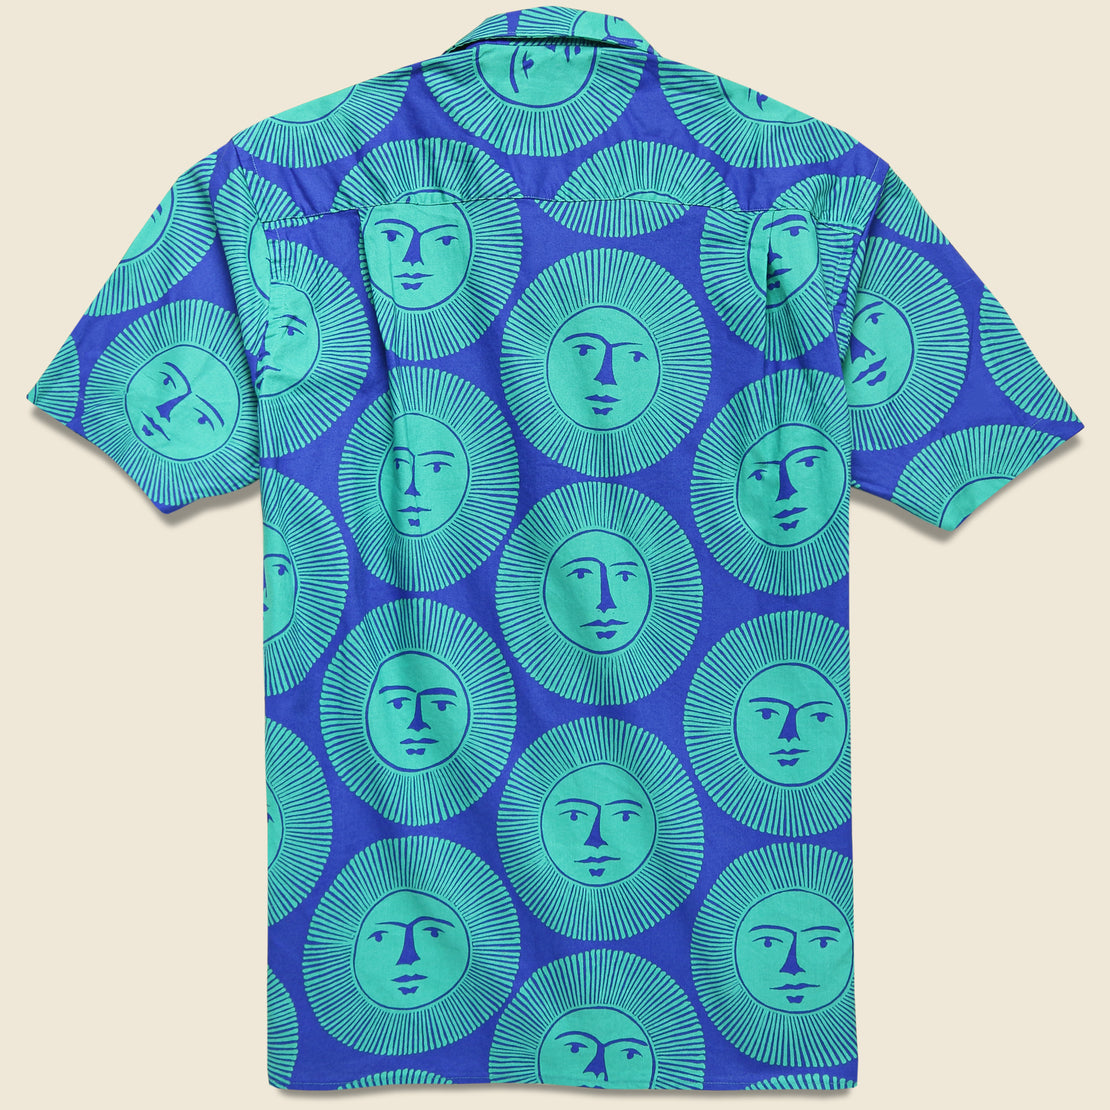 Here Comes The Sun Camp Shirt - Green/Blue